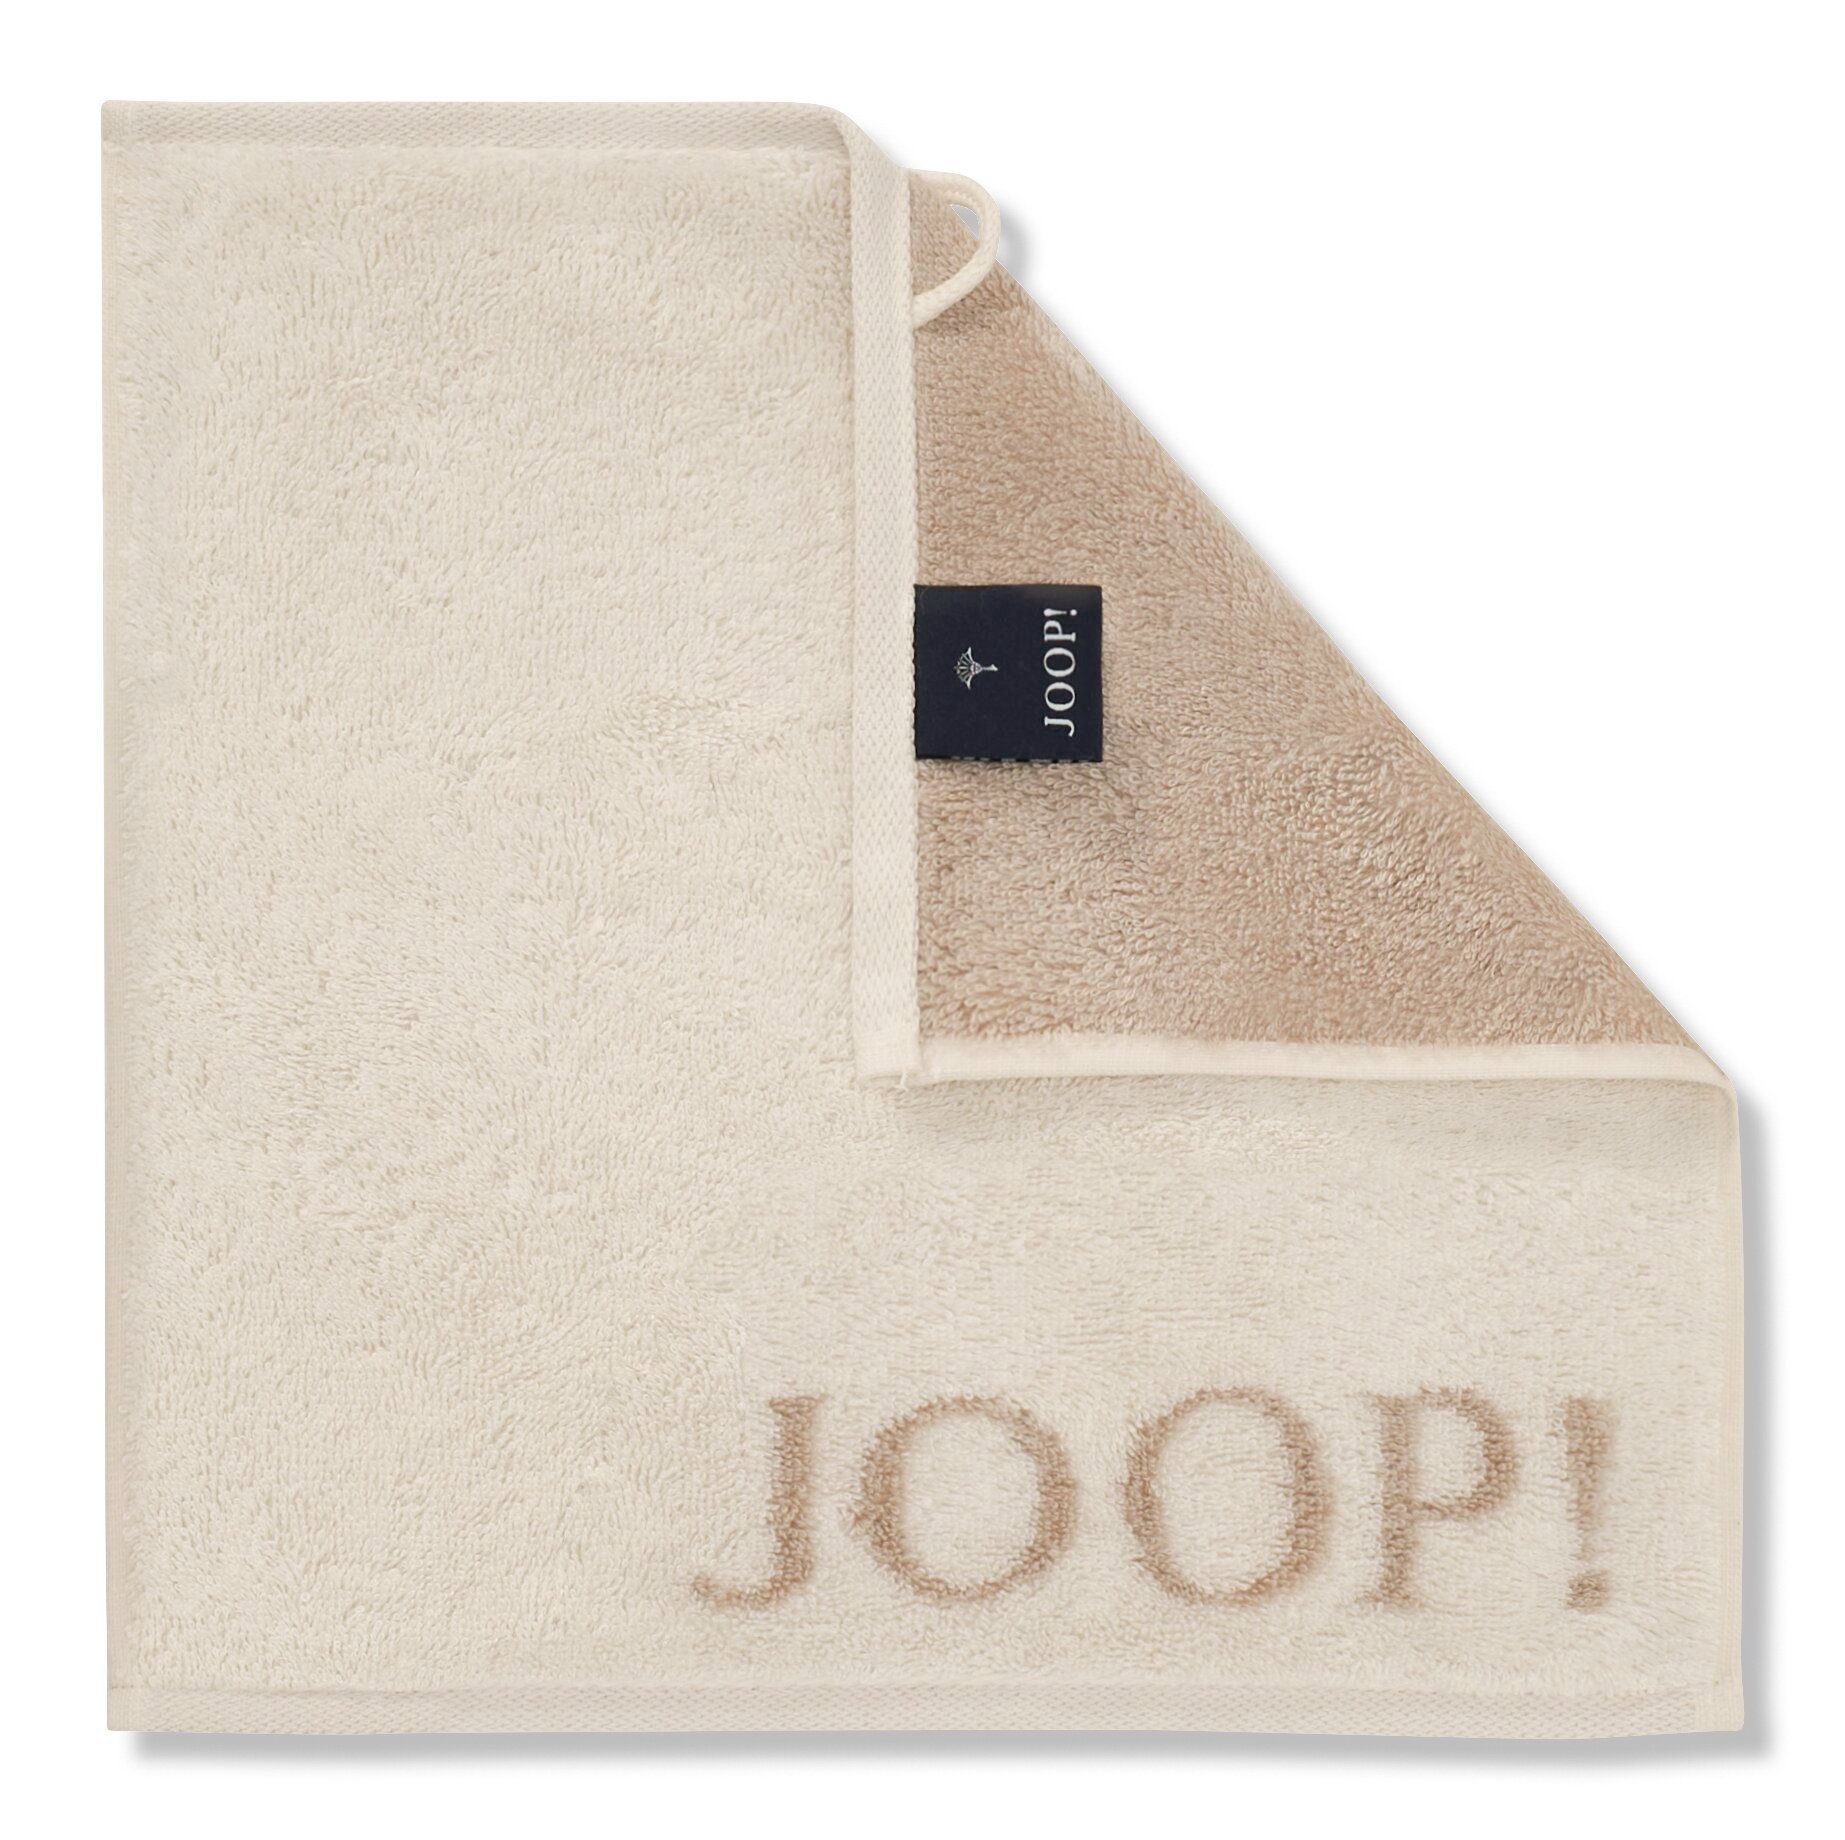 JOOP! LIVING (3-tlg) CLASSIC DOUBLEFACE - Creme Seifentuch-Set Joop! Seiftuch